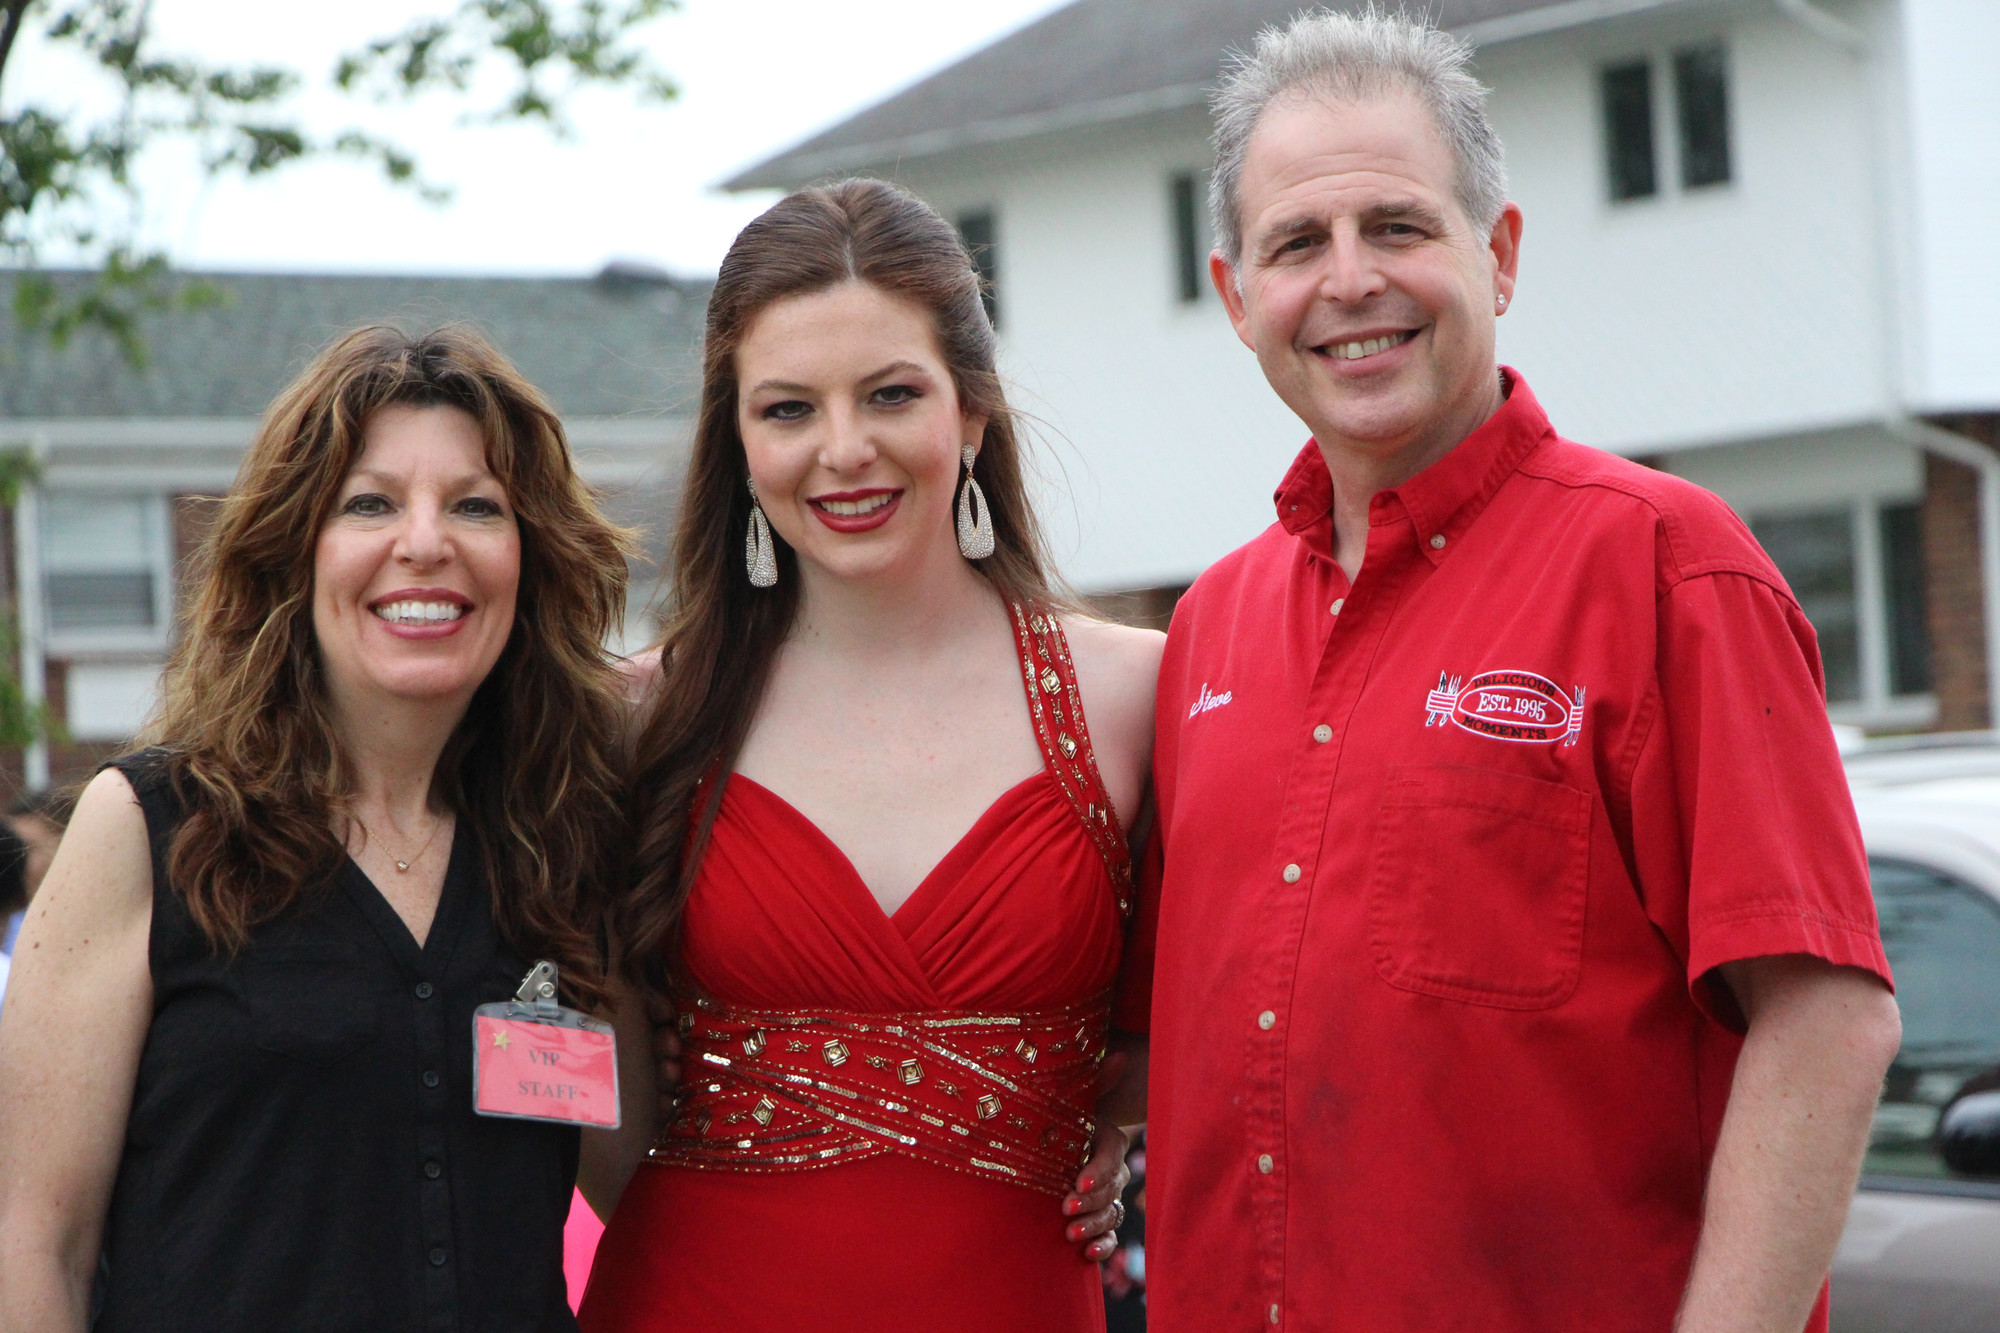 Nicole Sciortino, 18, with her parents, Robin and Steve, hosted the pre-prom festivities.